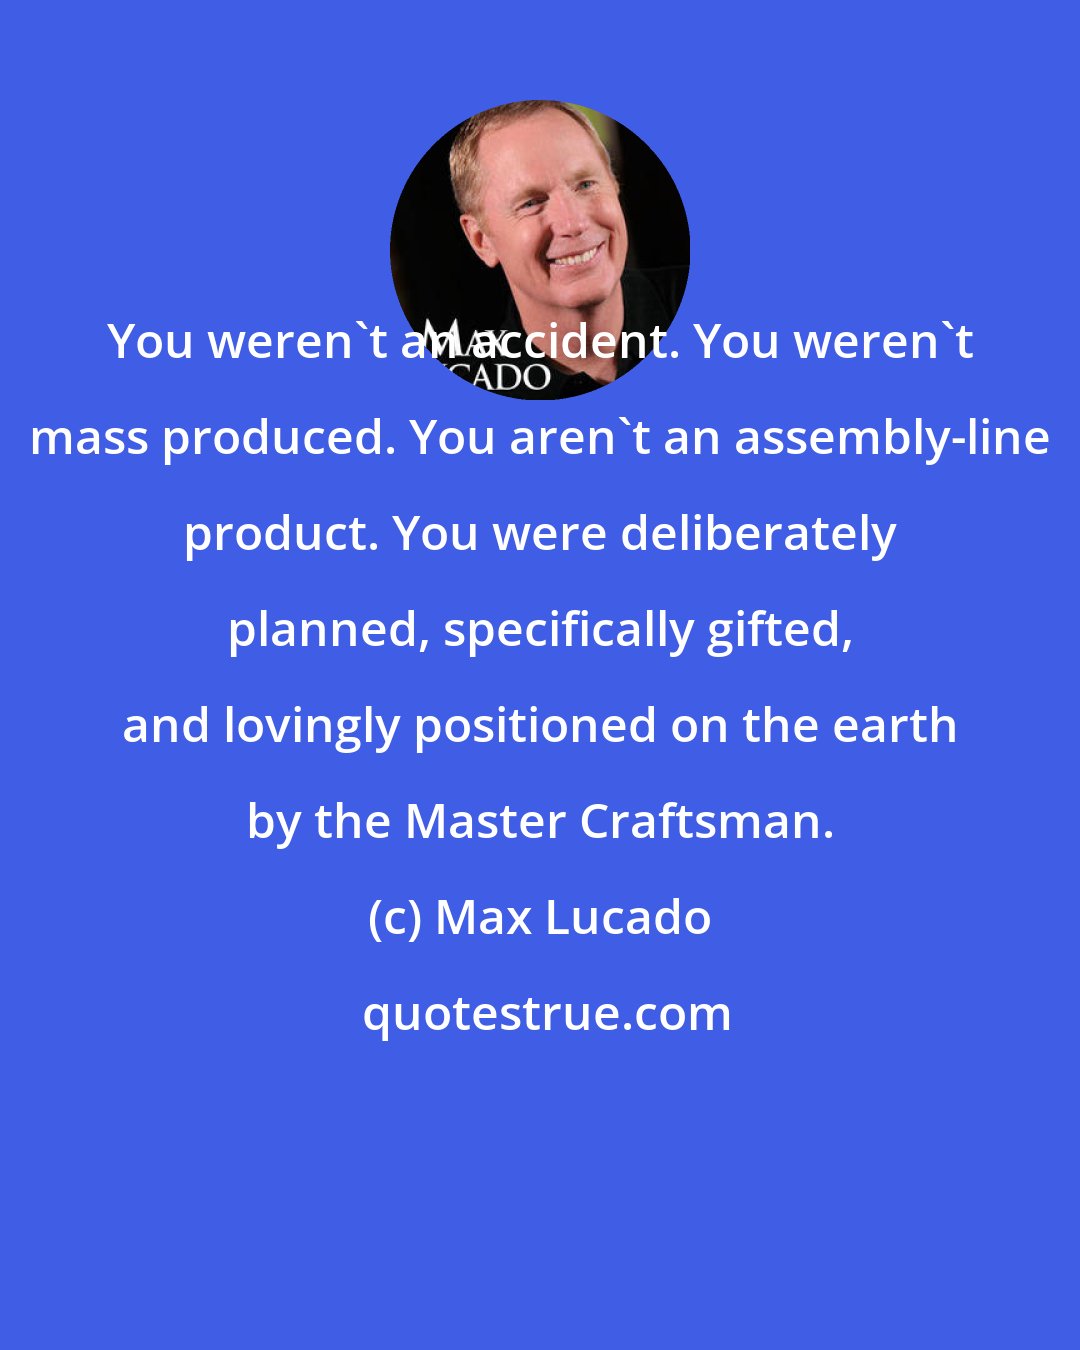 Max Lucado: You weren't an accident. You weren't mass produced. You aren't an assembly-line product. You were deliberately planned, specifically gifted, and lovingly positioned on the earth by the Master Craftsman.